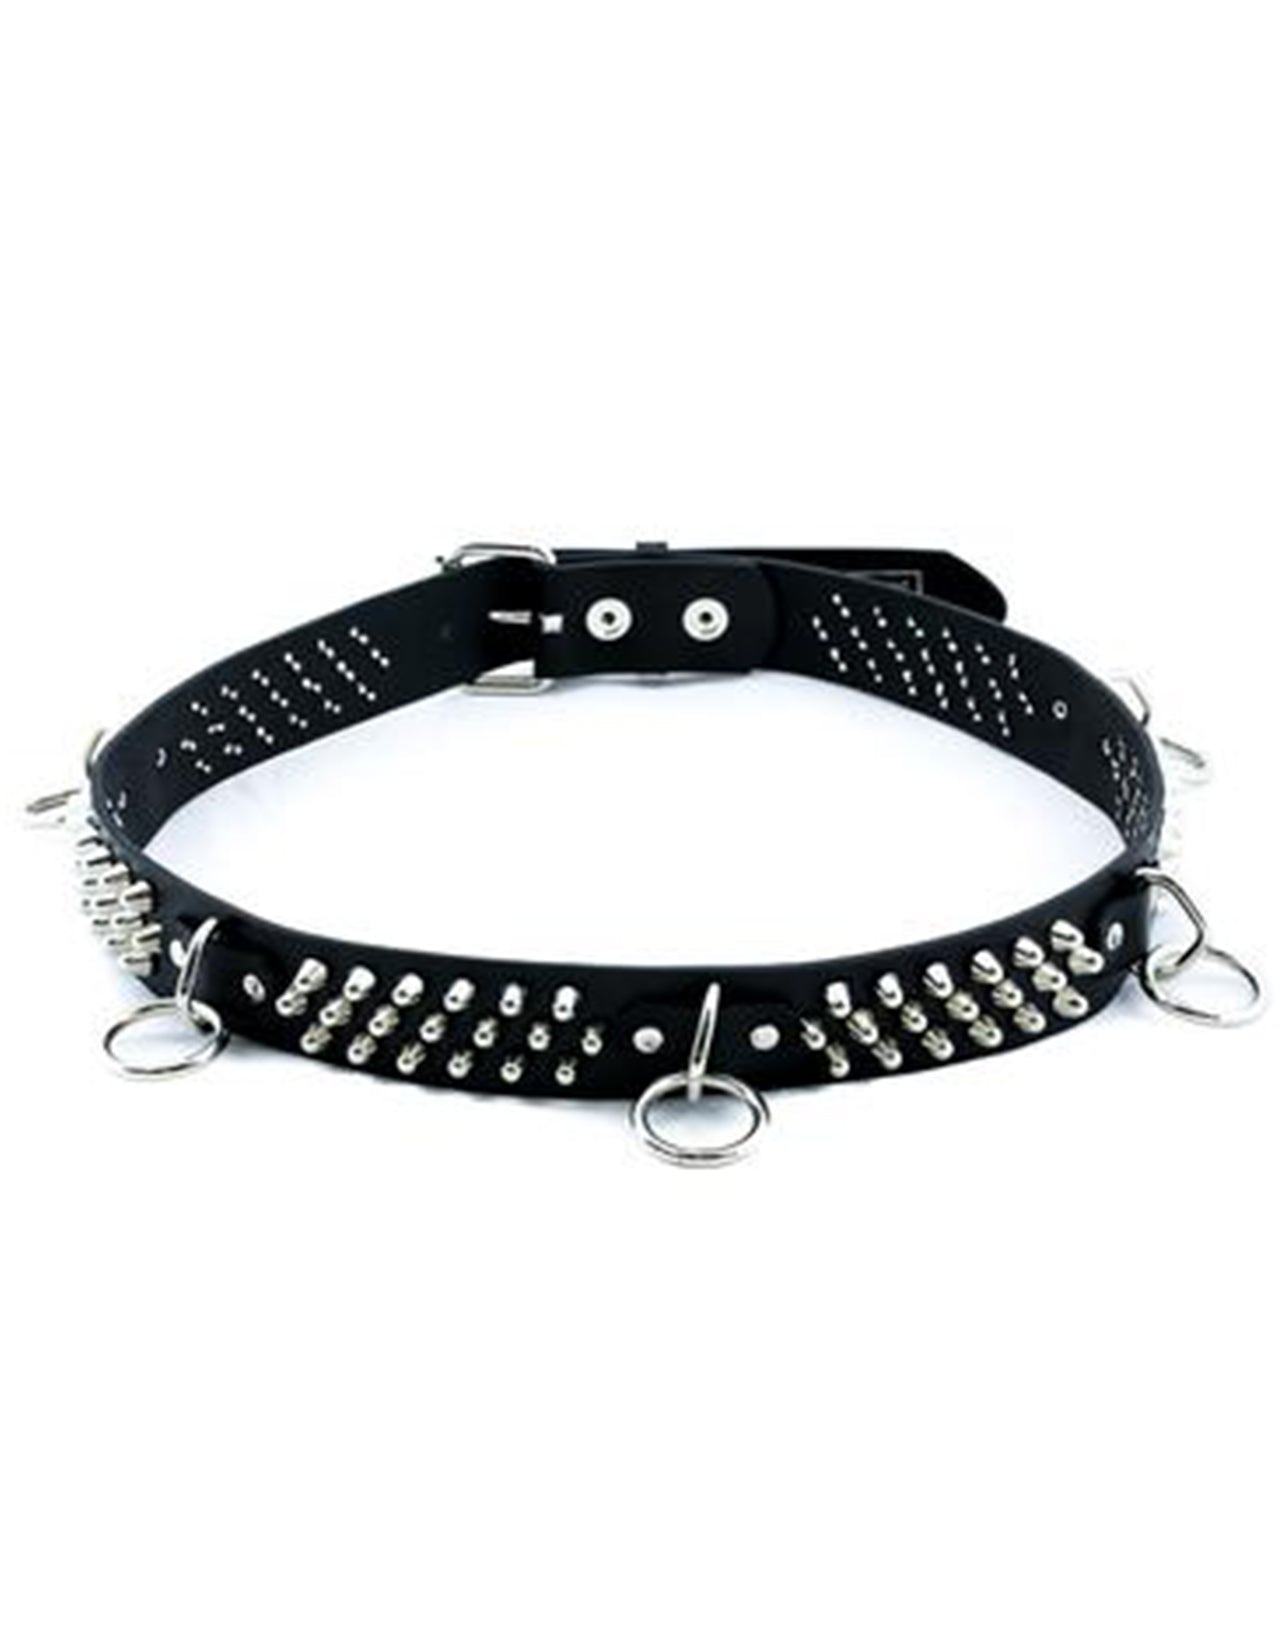 D Ring and Studded Belt